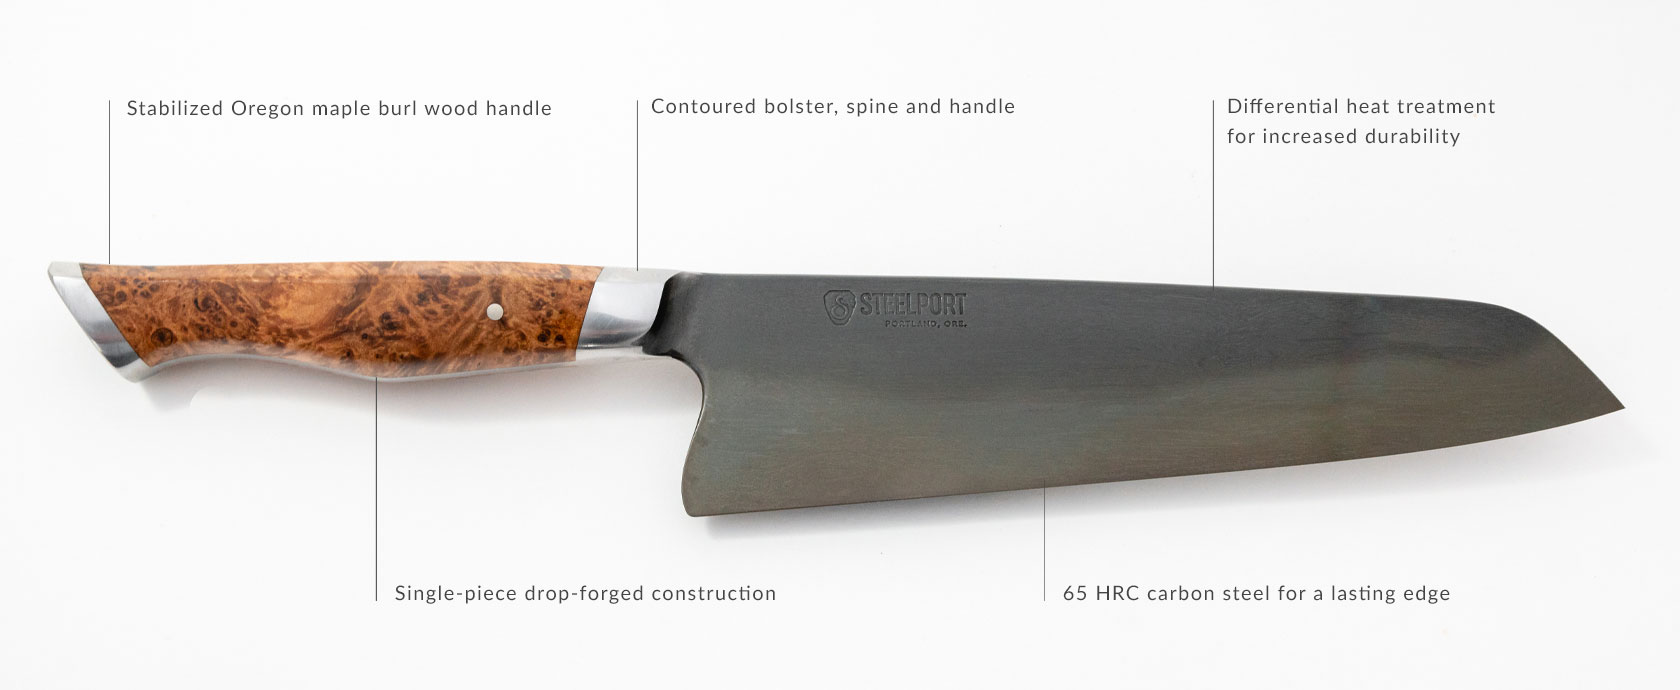 Steelport knife, stabilized Oregon maple burlwood handle. Contoured bolster, spine and handle. Differential heat treatment for increasted durability. Single piece drop forged construction. 65 HRC carbon steel for a lasting edge.